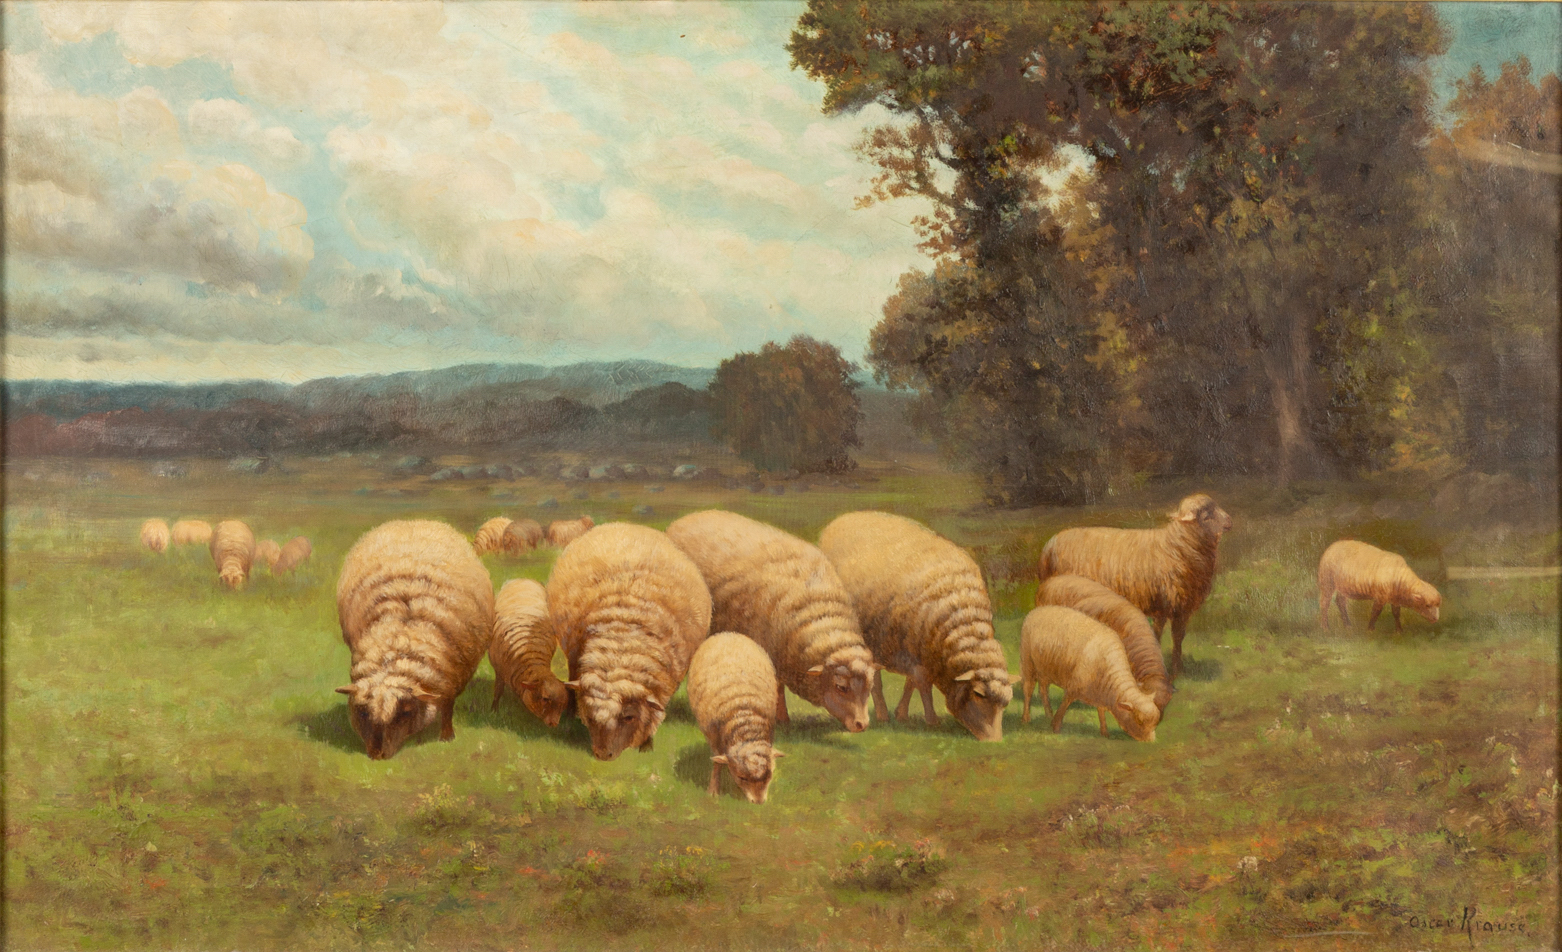 Landscape Painting of Sheep - Image 2 of 6